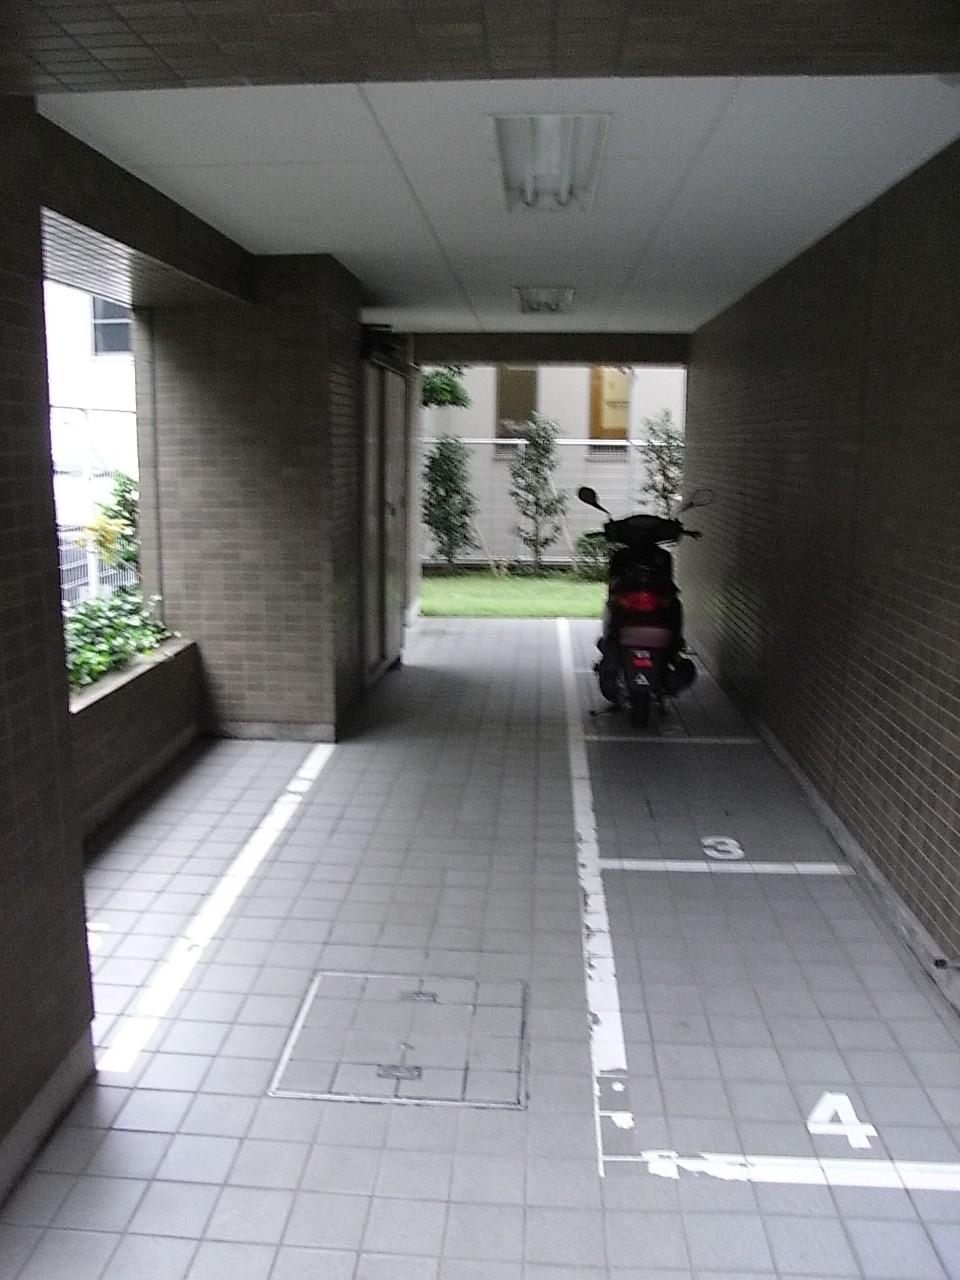 Other common areas. Bike shelter